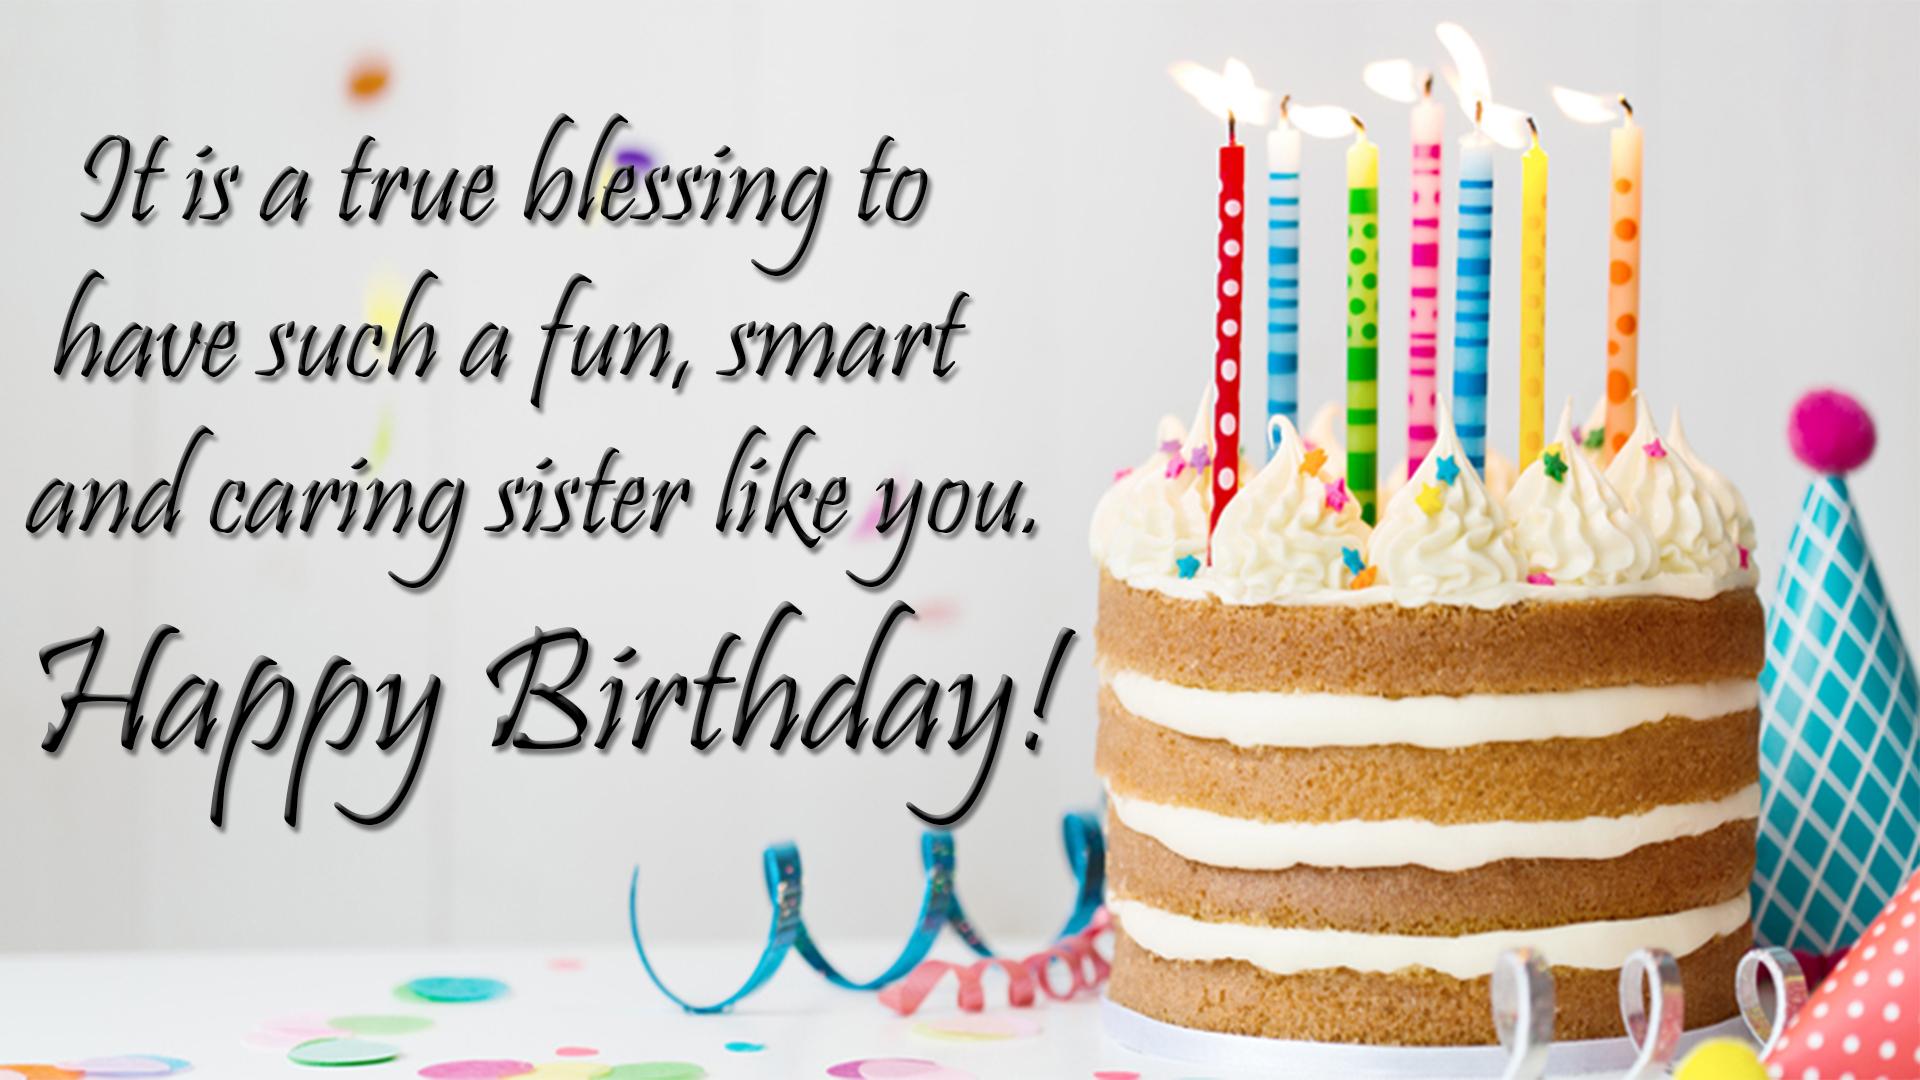 Happy Birthday Sister Wallpapers - Wallpaper Cave